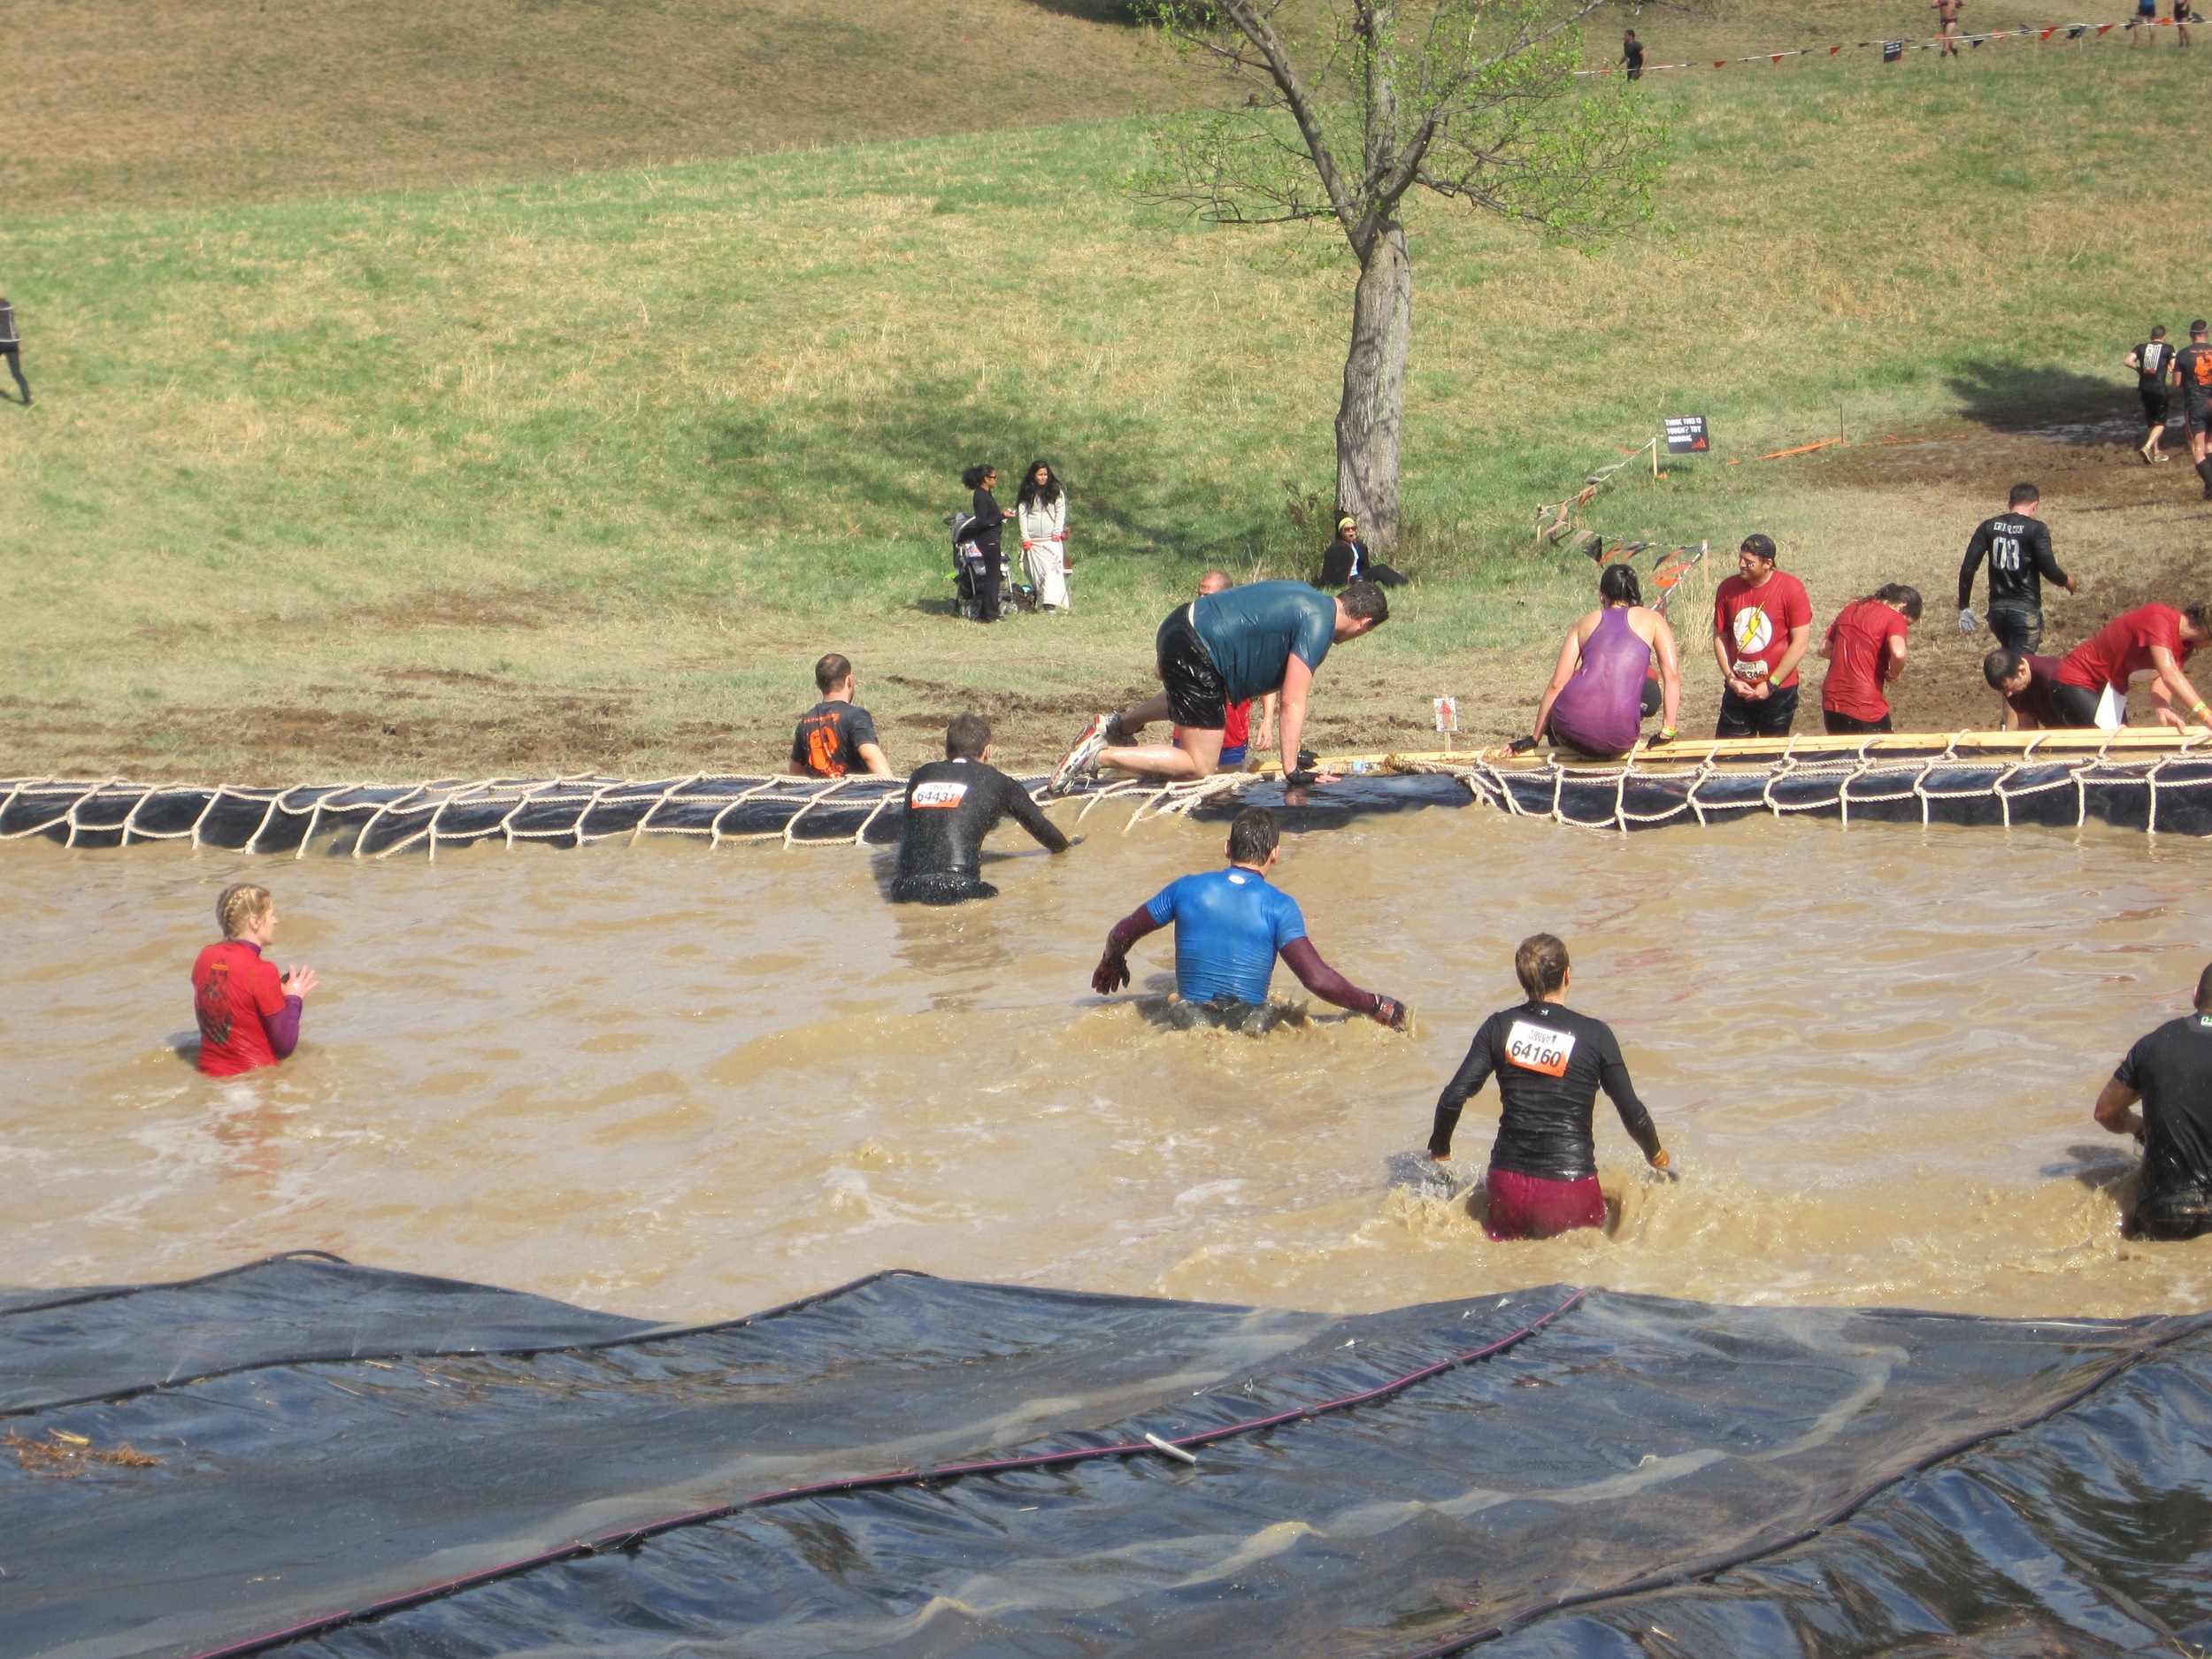  ...at least until you get to the bottom, when you're wading through more cold, muddy water. This was the fourth consecutive water obstacle in the final quarter of the race.​ 